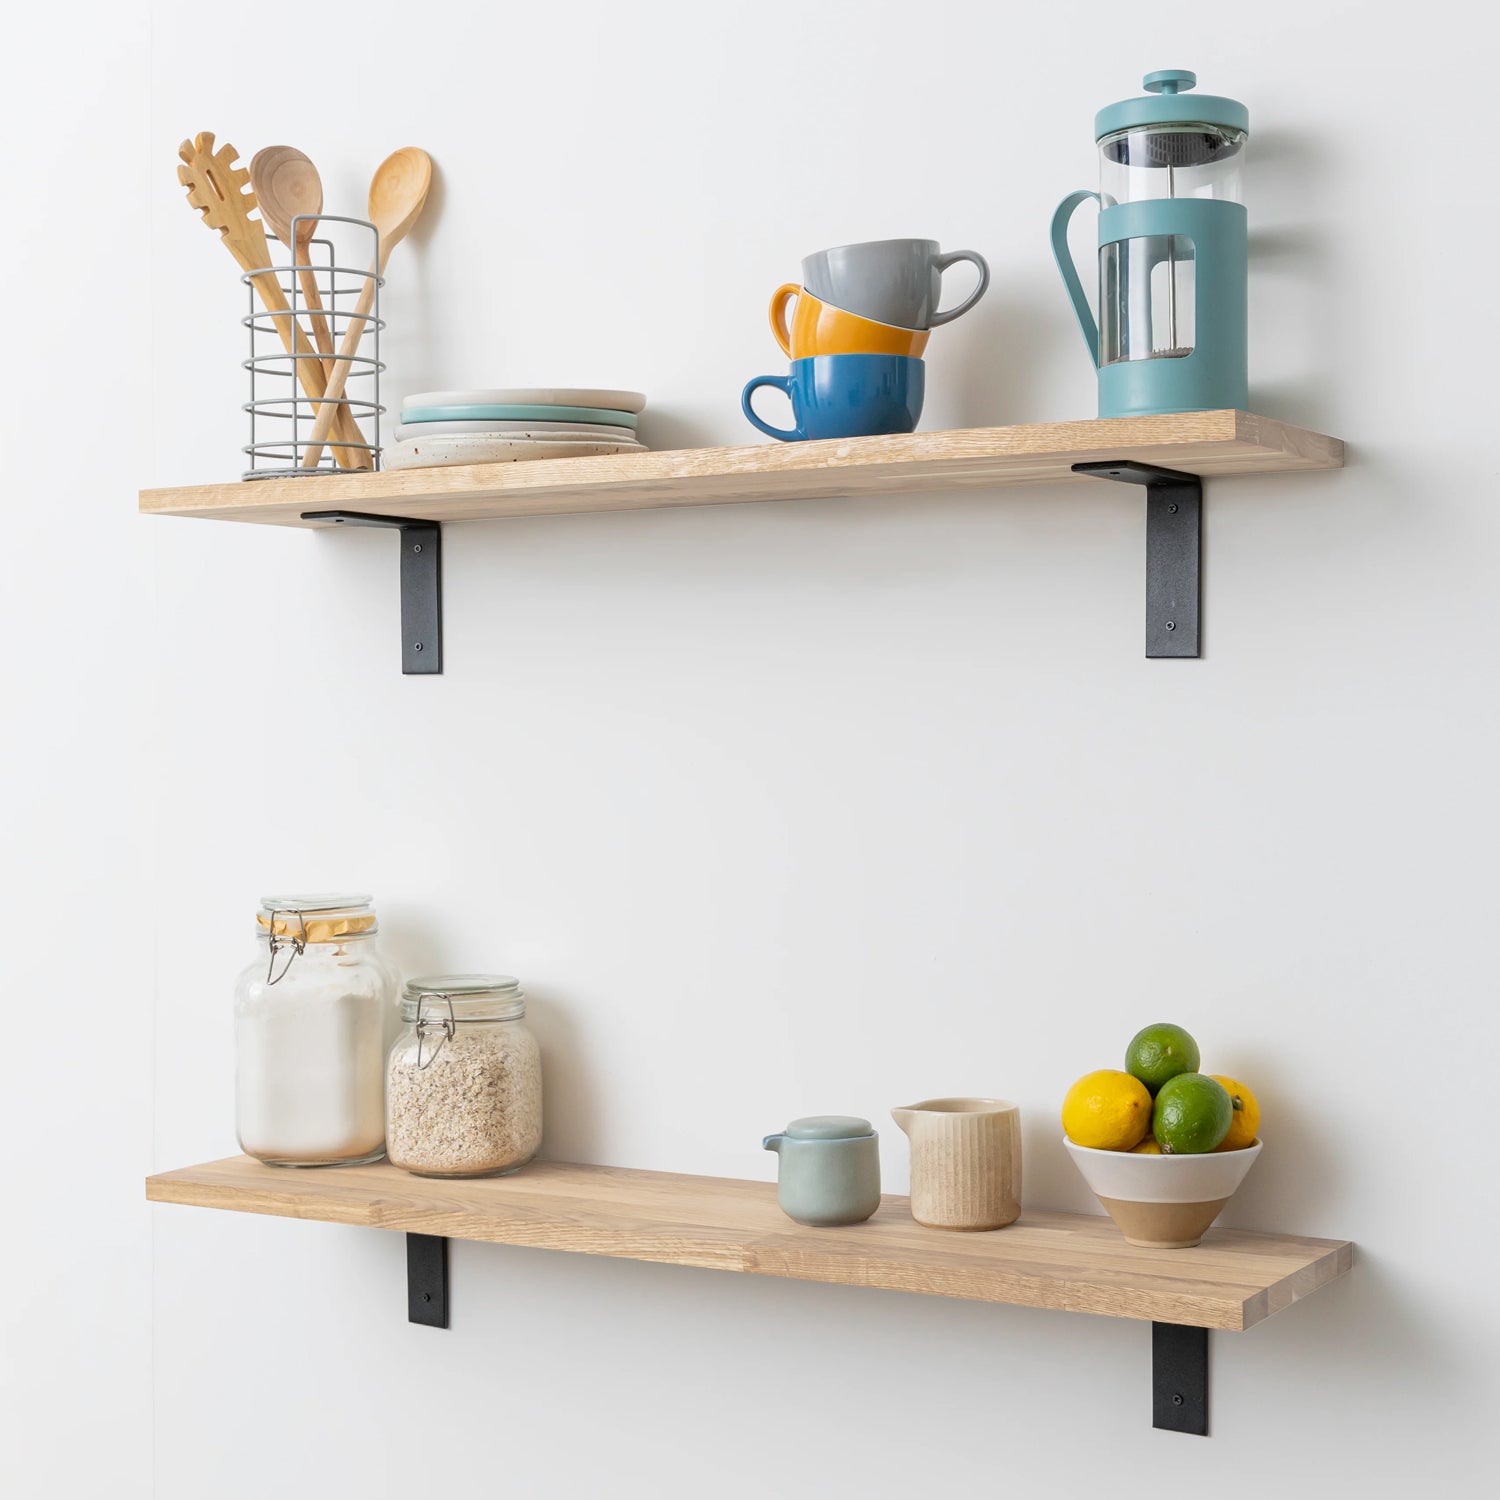 Solid Oak Wall Shelf (Sanded) - 18mm thick with Black Flat-Style Scaffolding Brackets